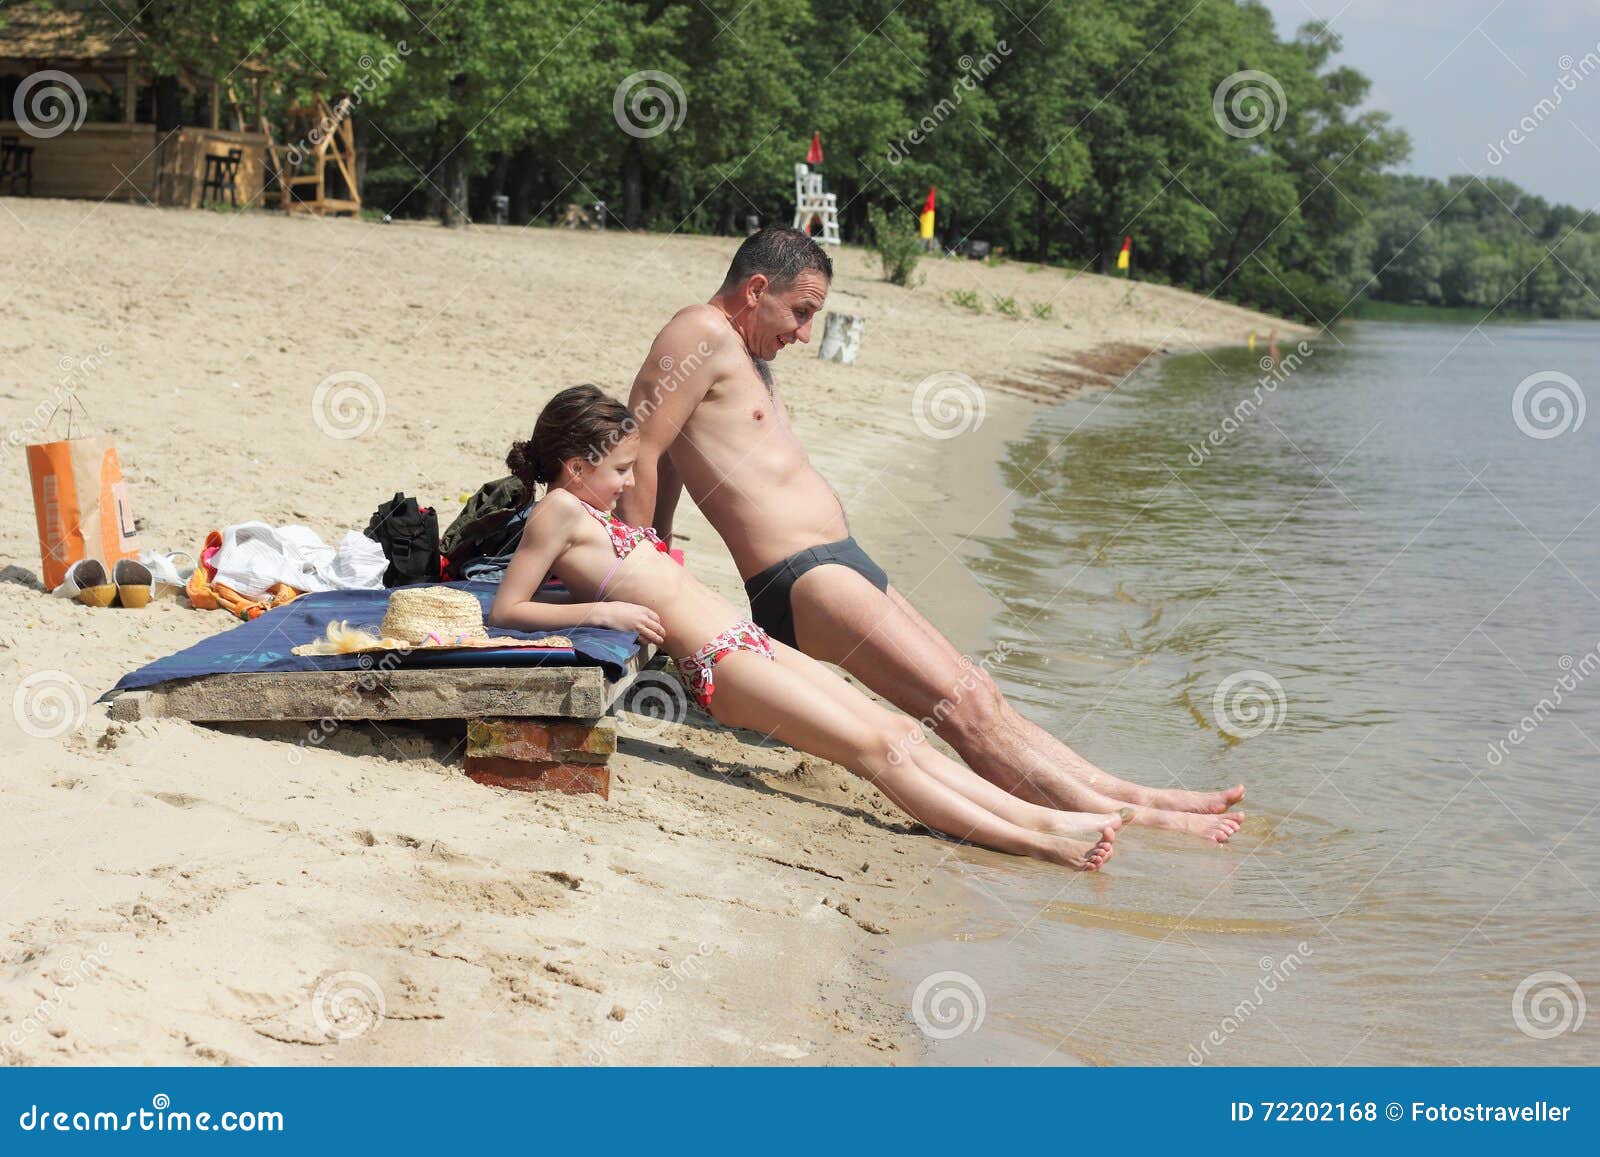 dad daughter nude in beach hd pic